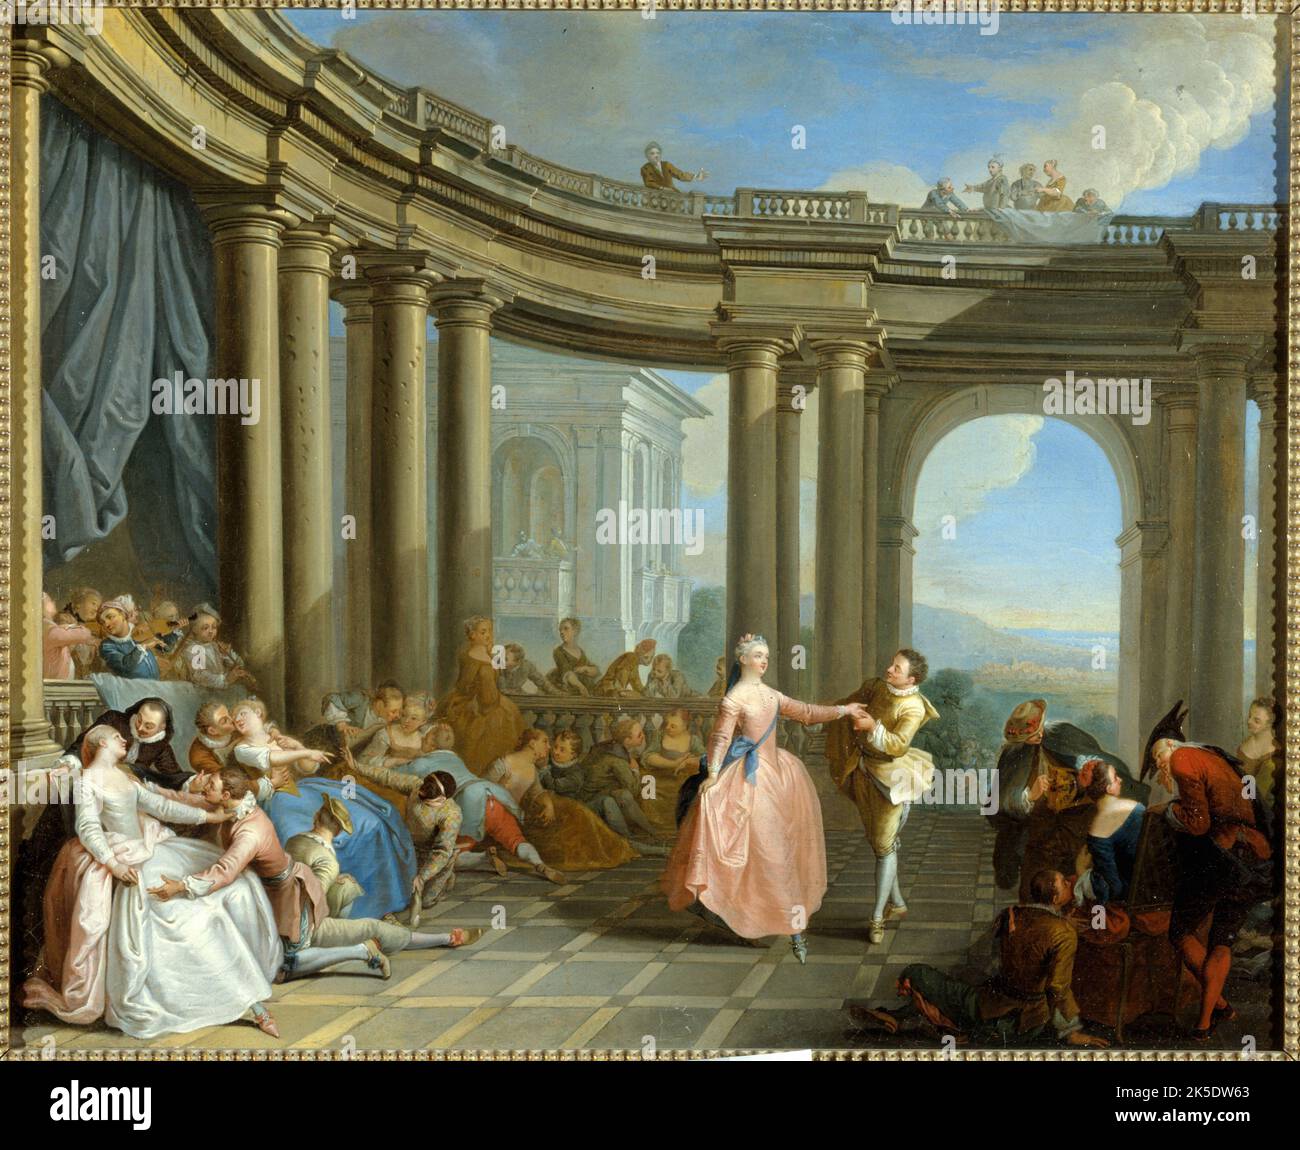 Le menuet, 18th century. The Minuet. Baroque dance, popular at the court of Louis XIV. Musicians, dancers and commedia dell'arte characters. The setting influenced by 'A Feast held in a Circular Portico of the Ionic Order' by Giovanni Paolo Panini. Stock Photo